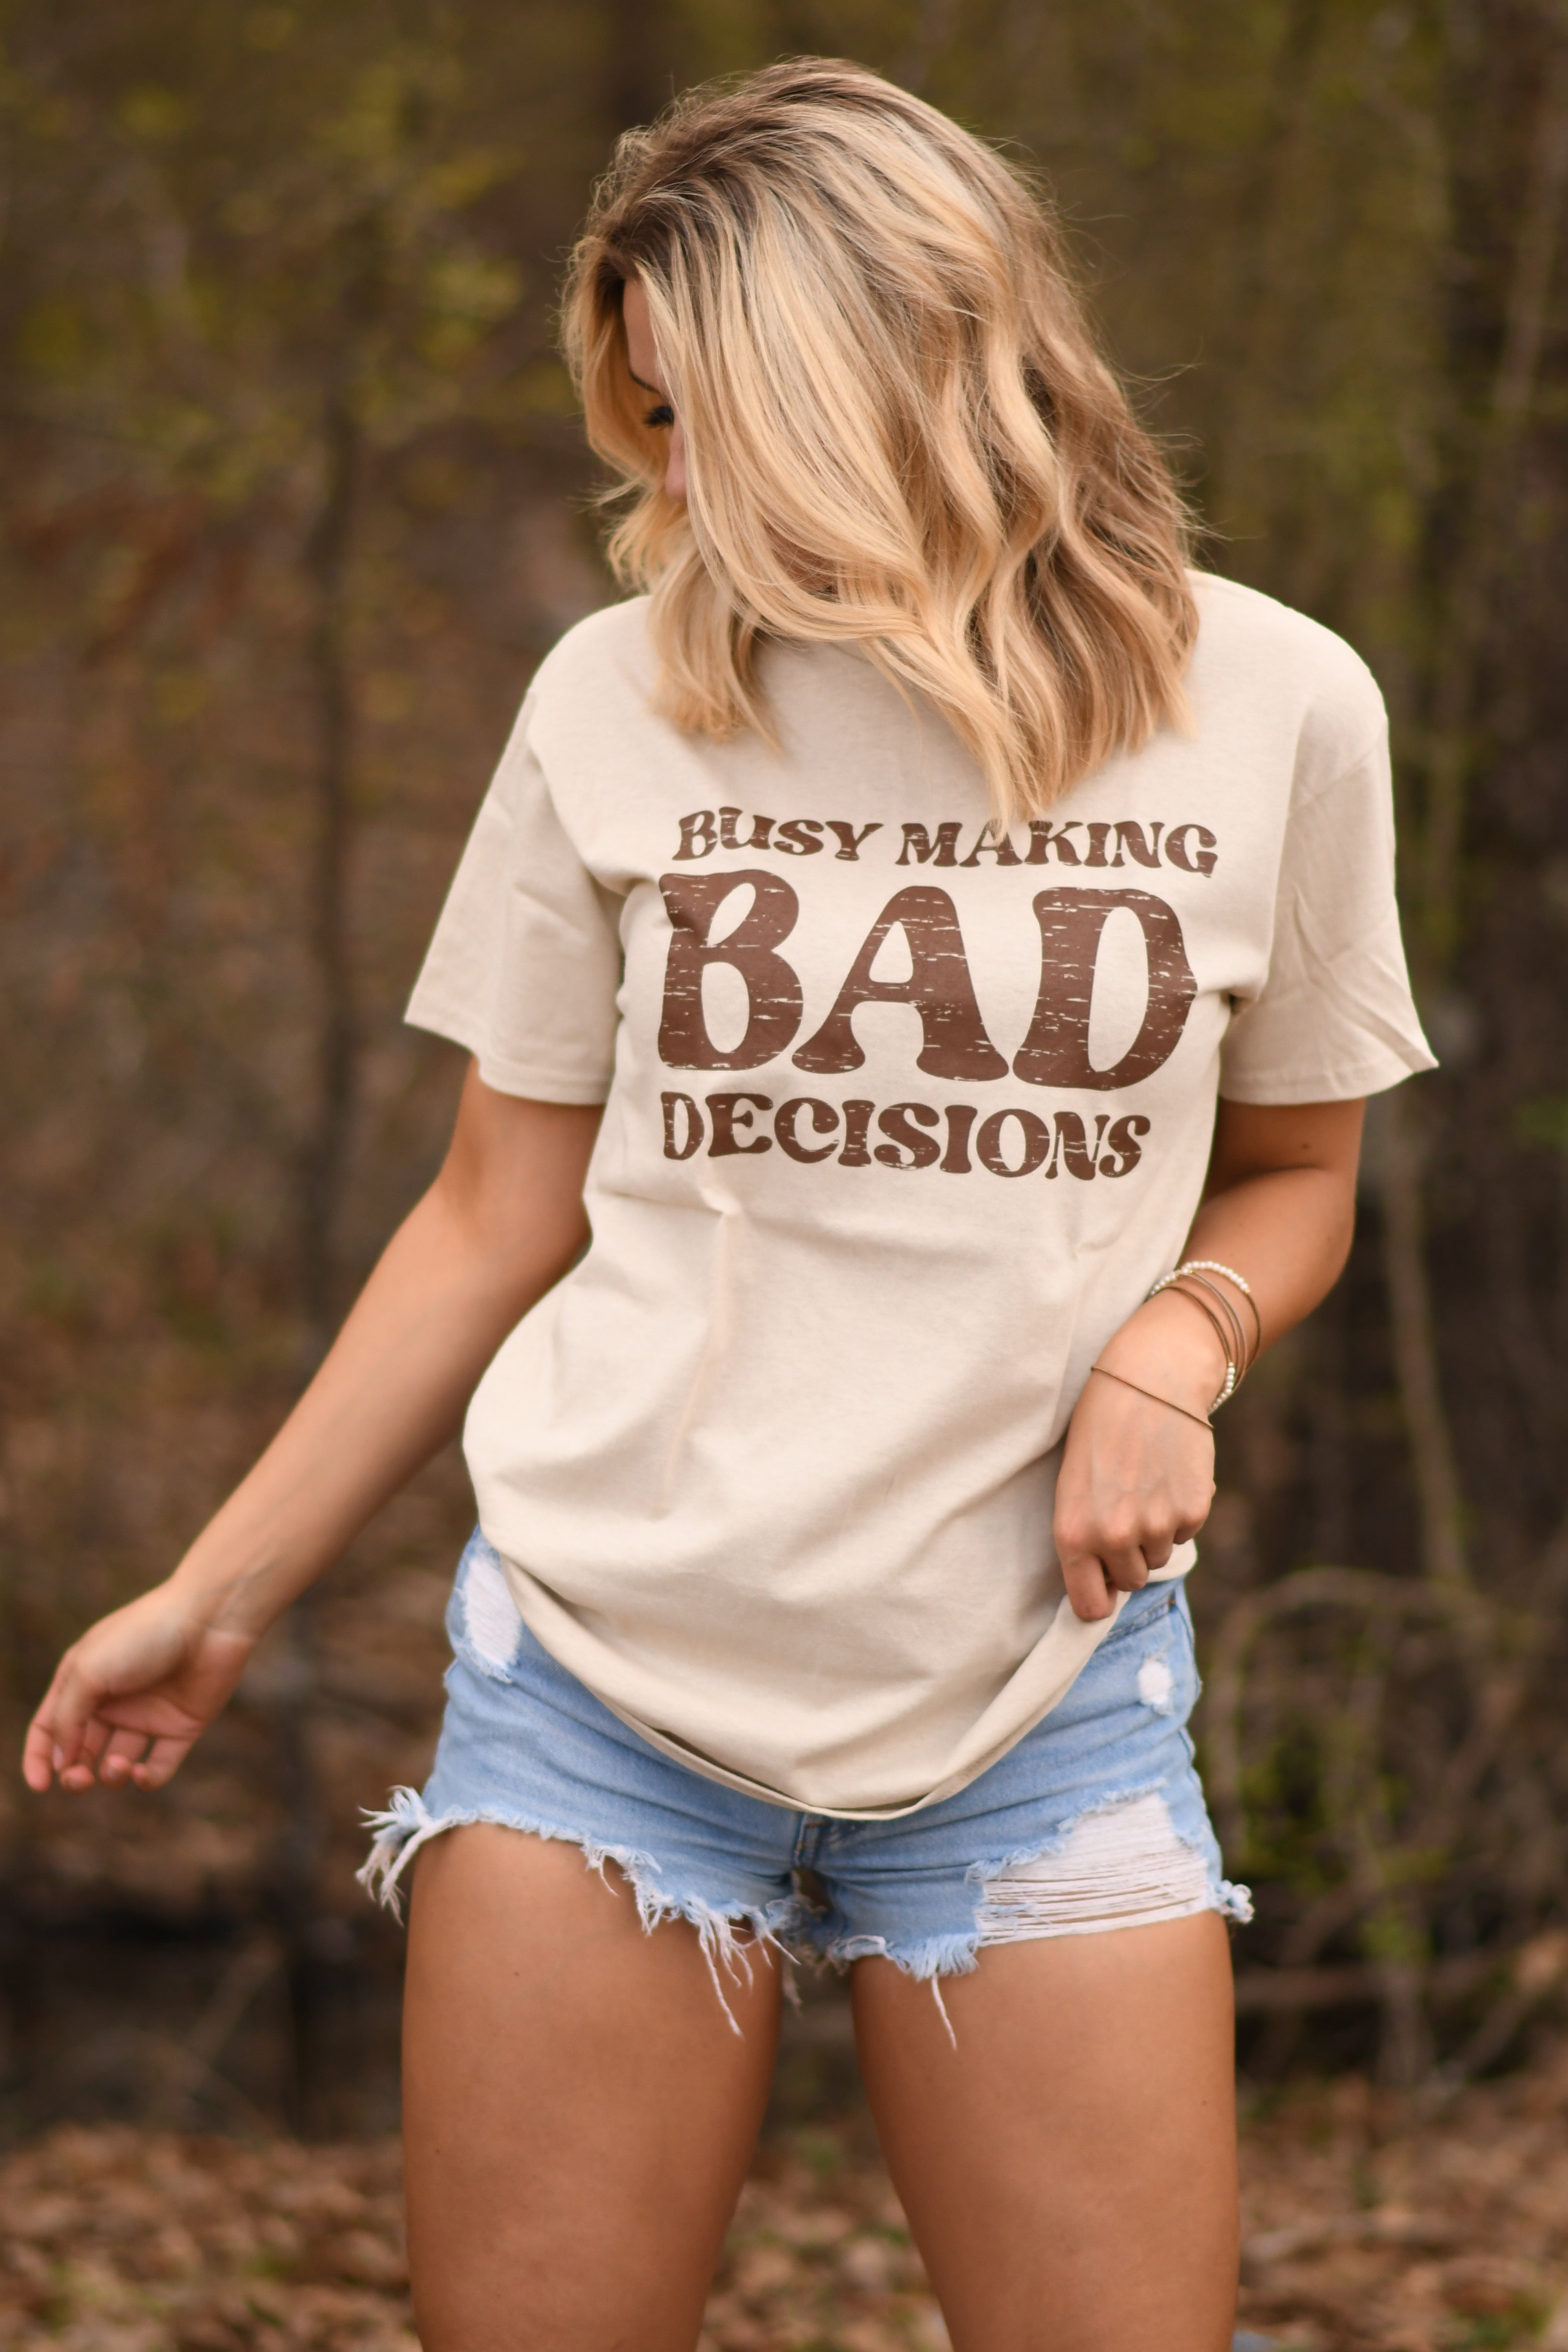 Busy Making Bad Decisions Tee - The Glamorous Cowgirl